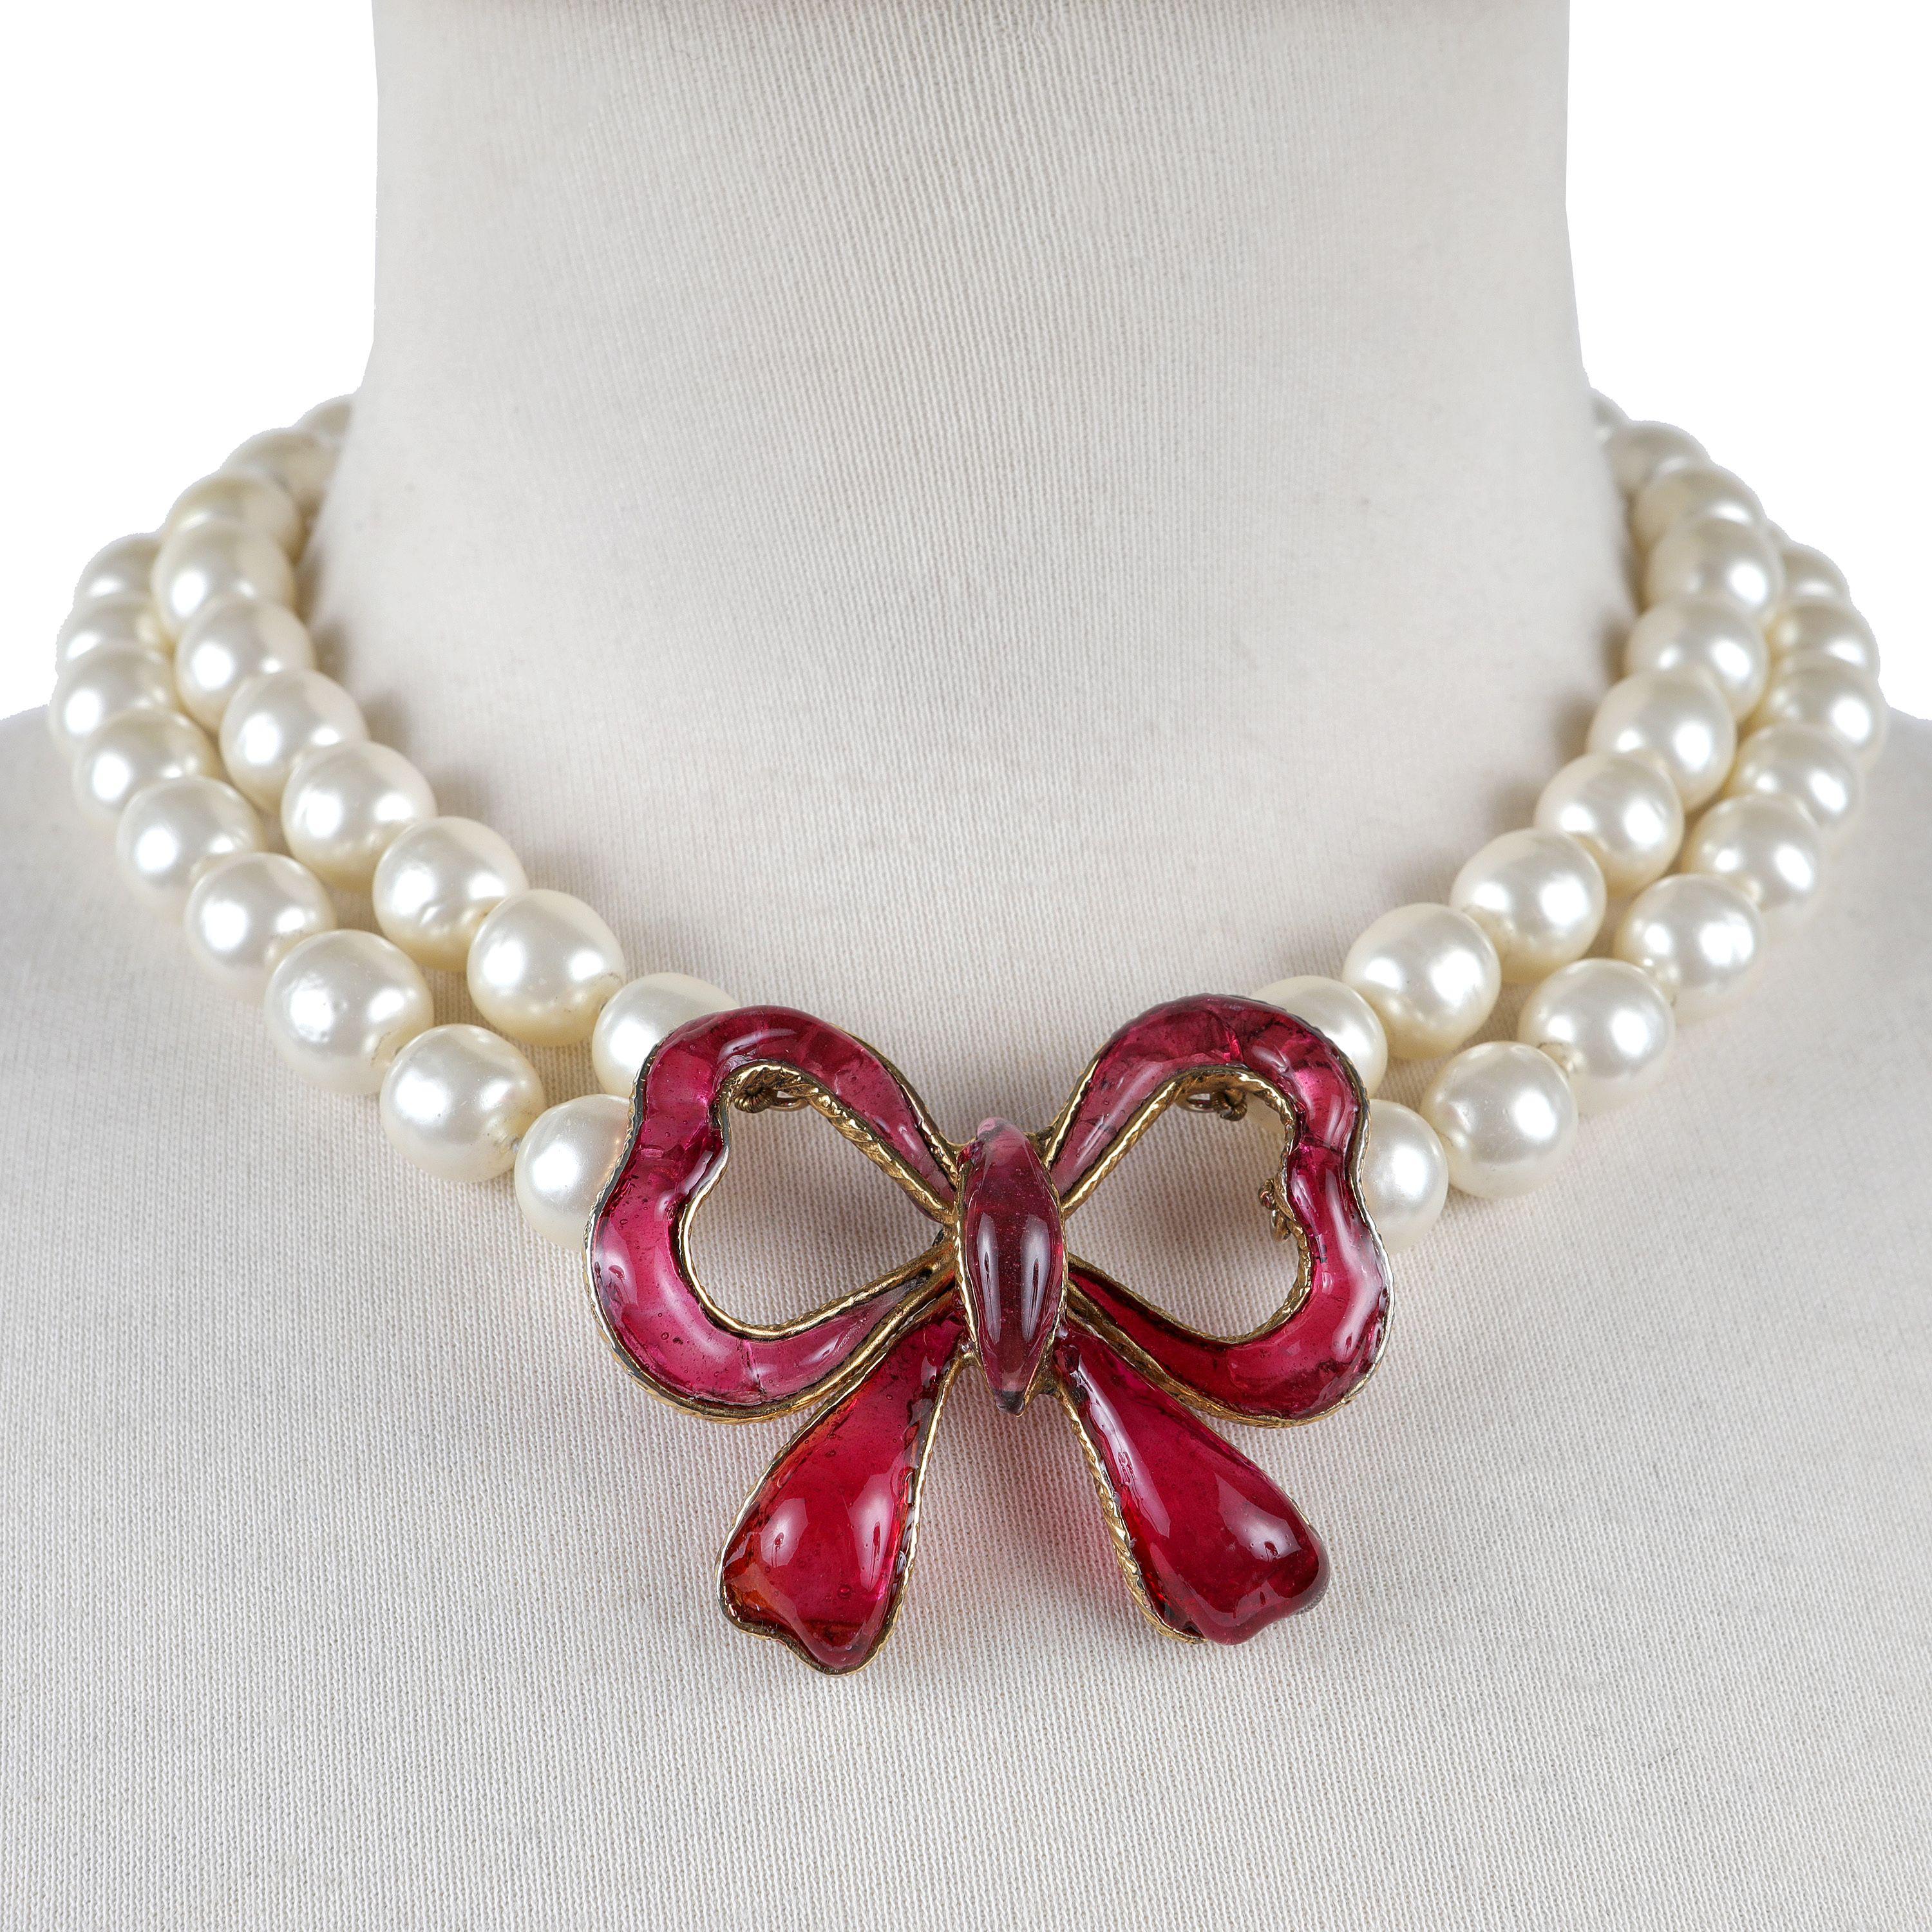 This authentic Chanel Double Pearl Red Gripoix Bow Choker is in excellent vintage condition from the 1970’s.  Double strand of large faux pearls is anchored with a substantial red bow made in Gripoix glass.   Pouch or box included.

PBF 13802
